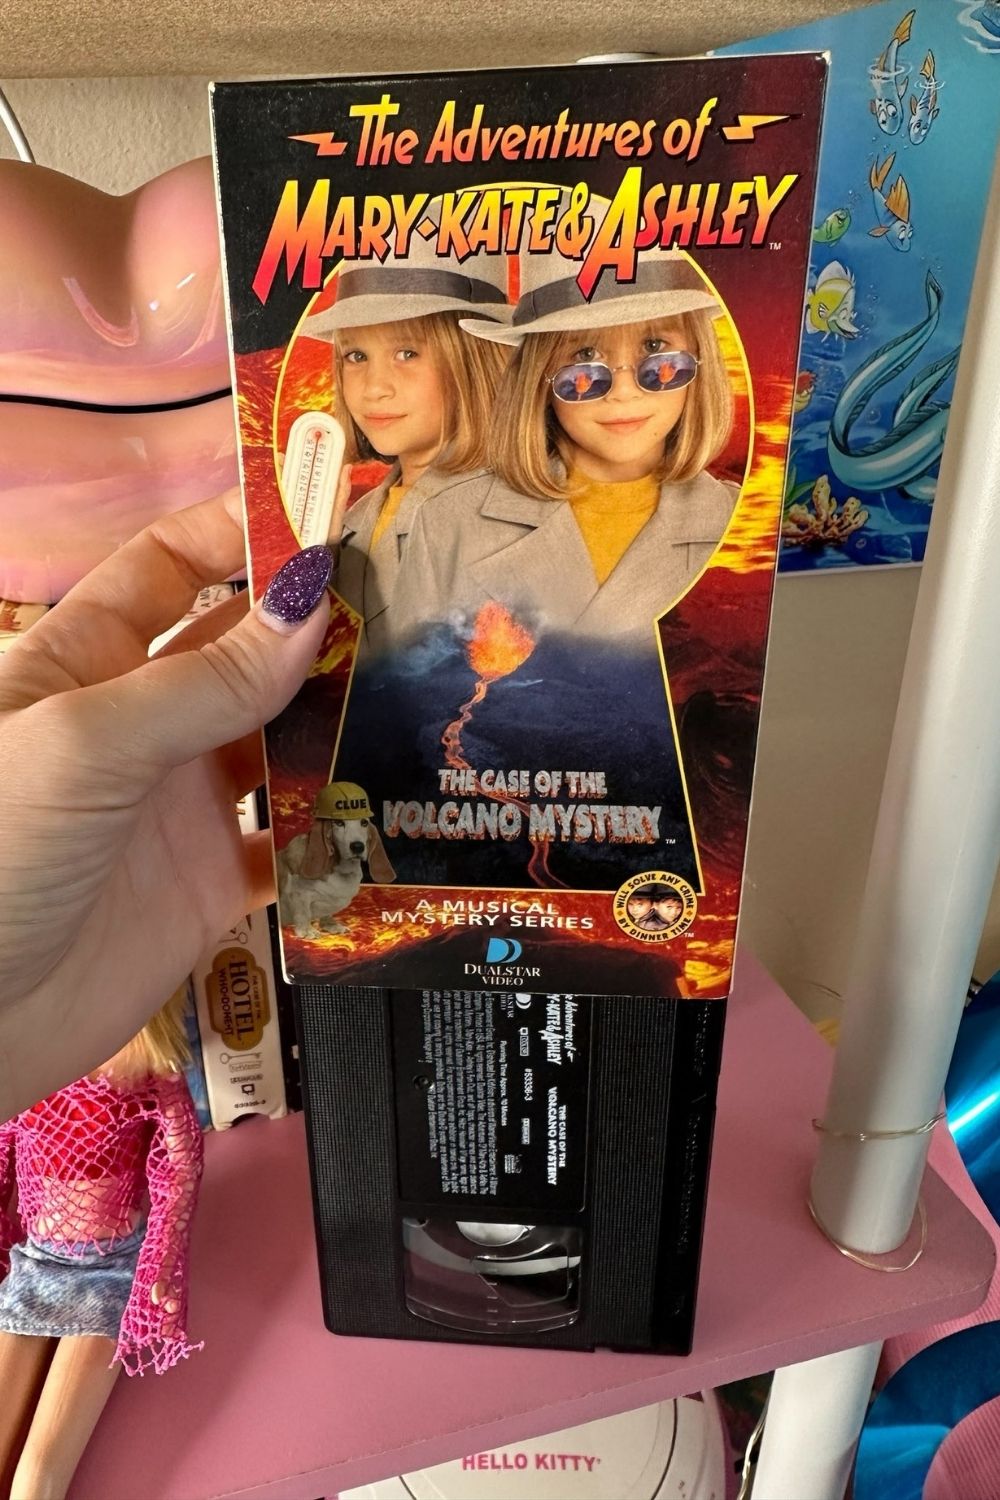 THE ADVENTURES OF MARY-KATE & ASHLEY: THE CASE OF THE VOLCANO MYSTERY VHS*